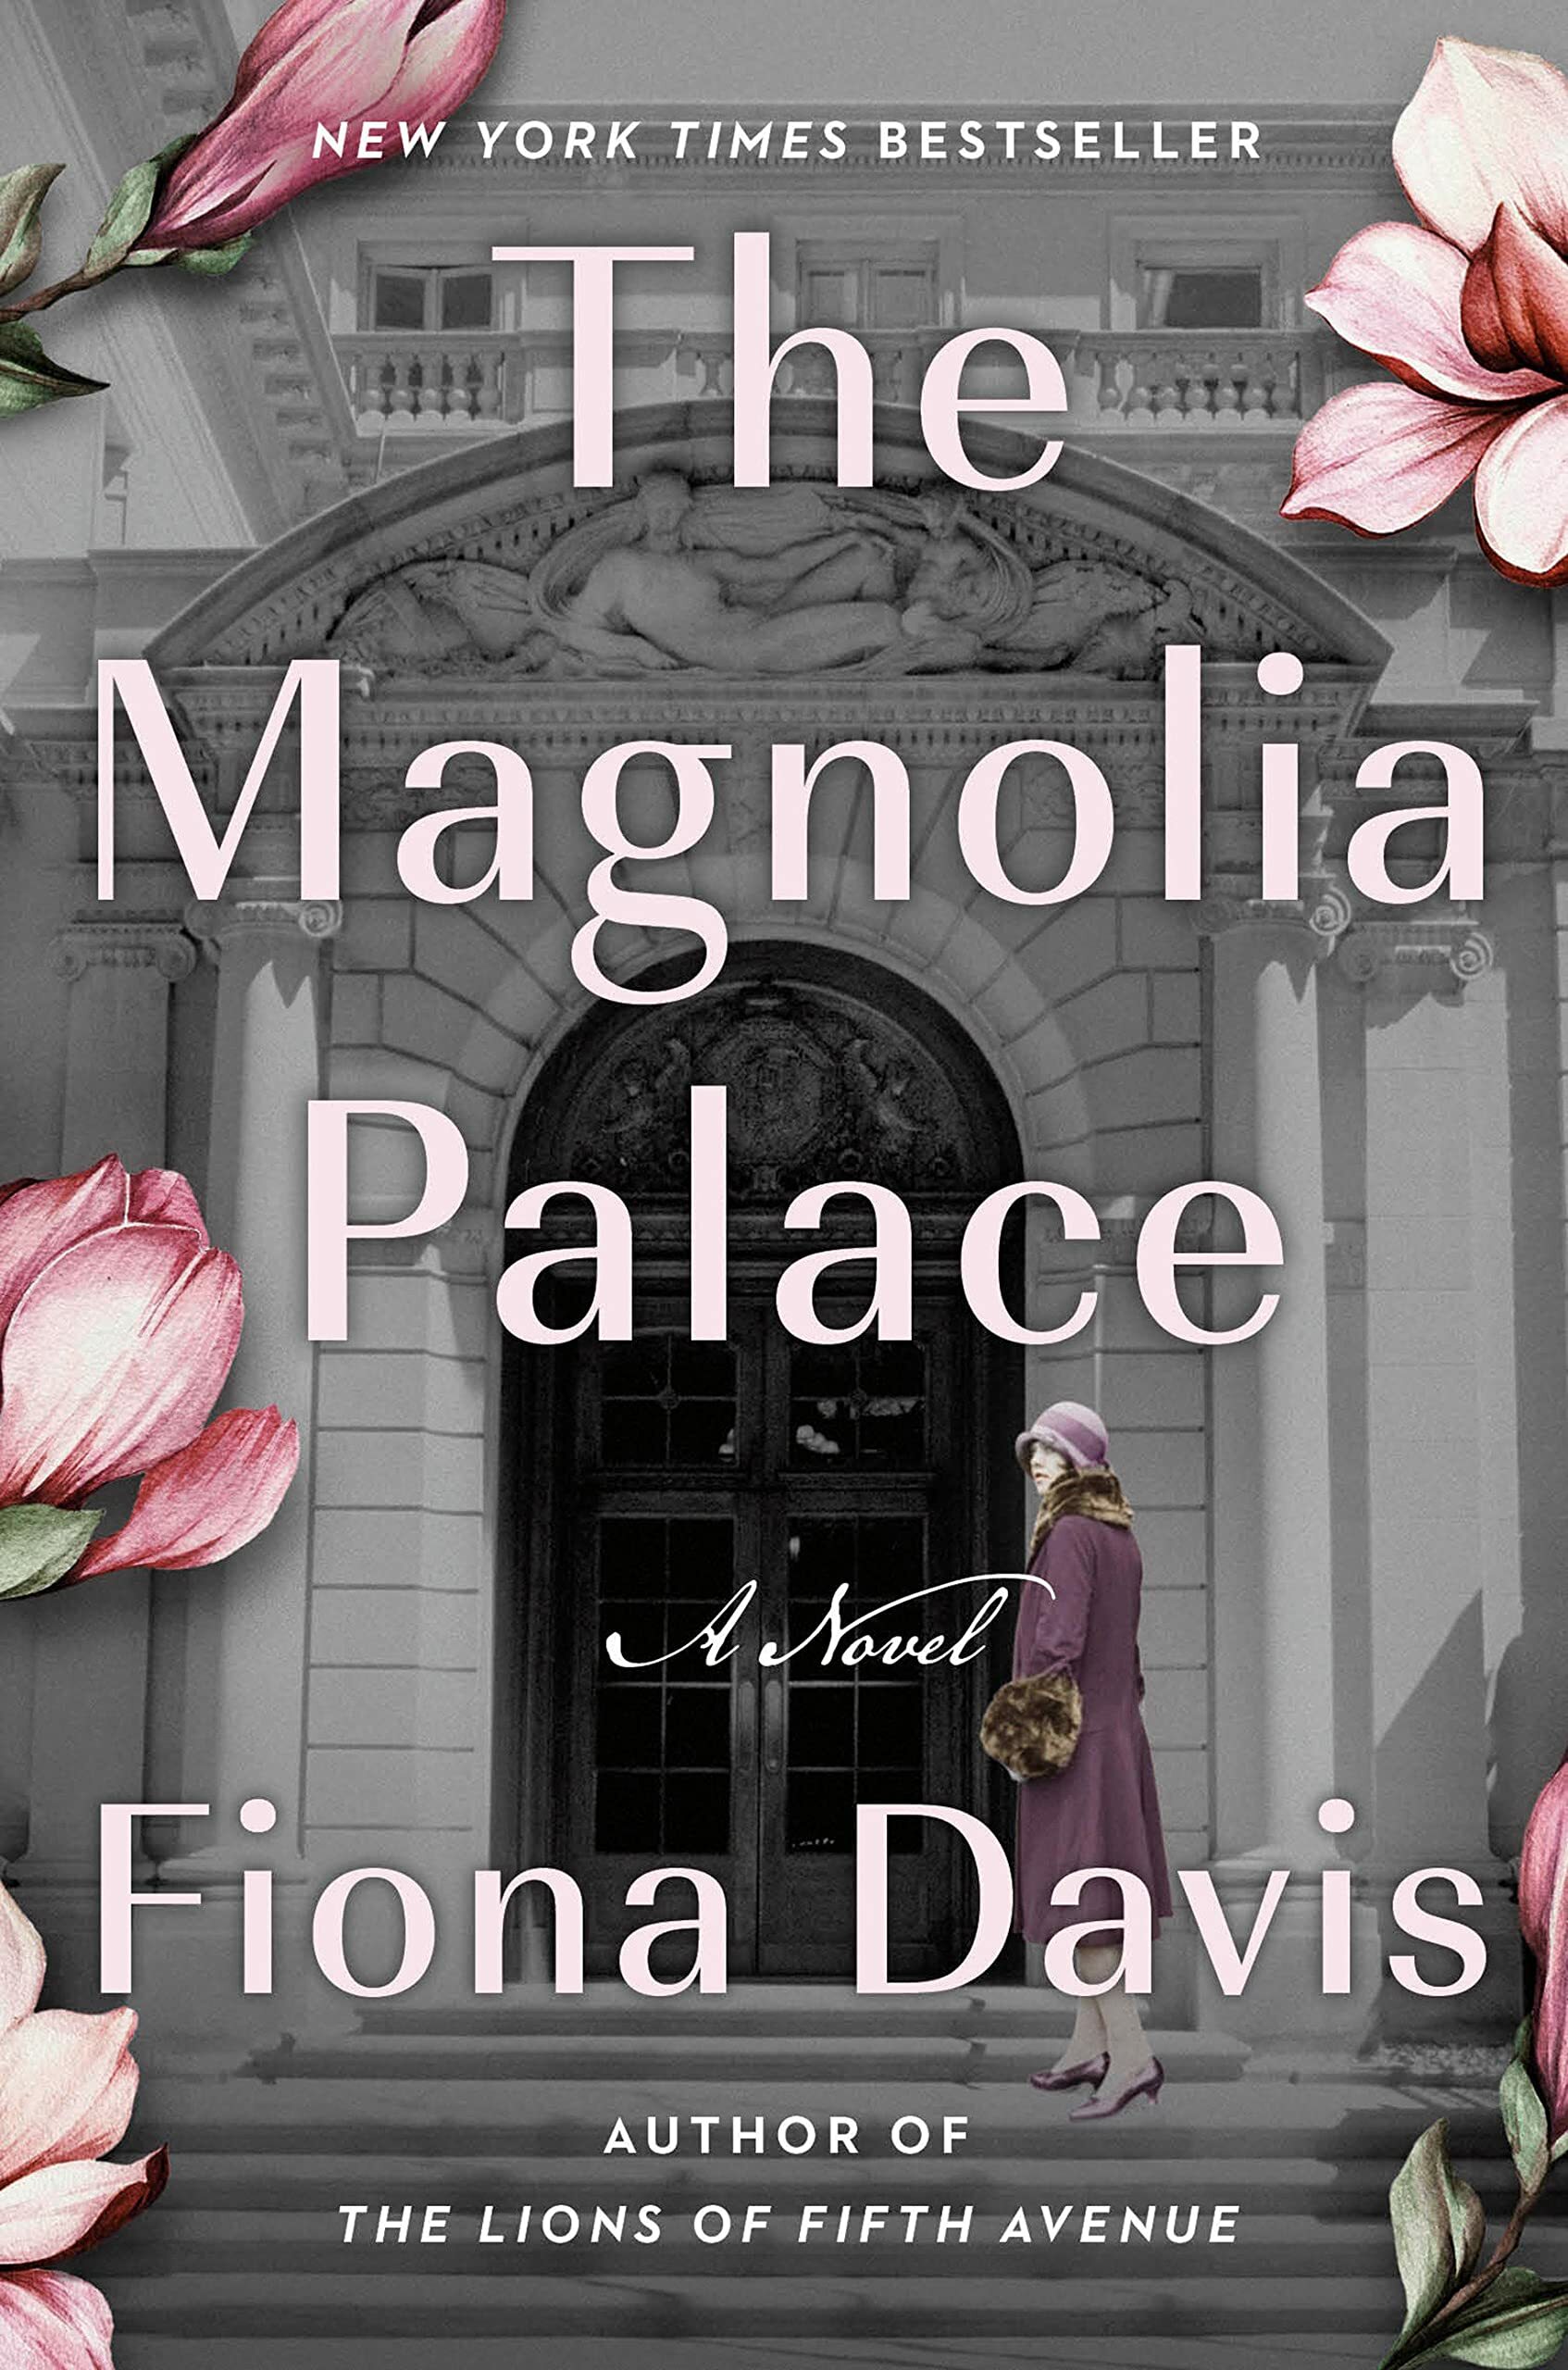 Fiona Davis discusses her book “The Magnolia Palace: A Novel” on July 22.